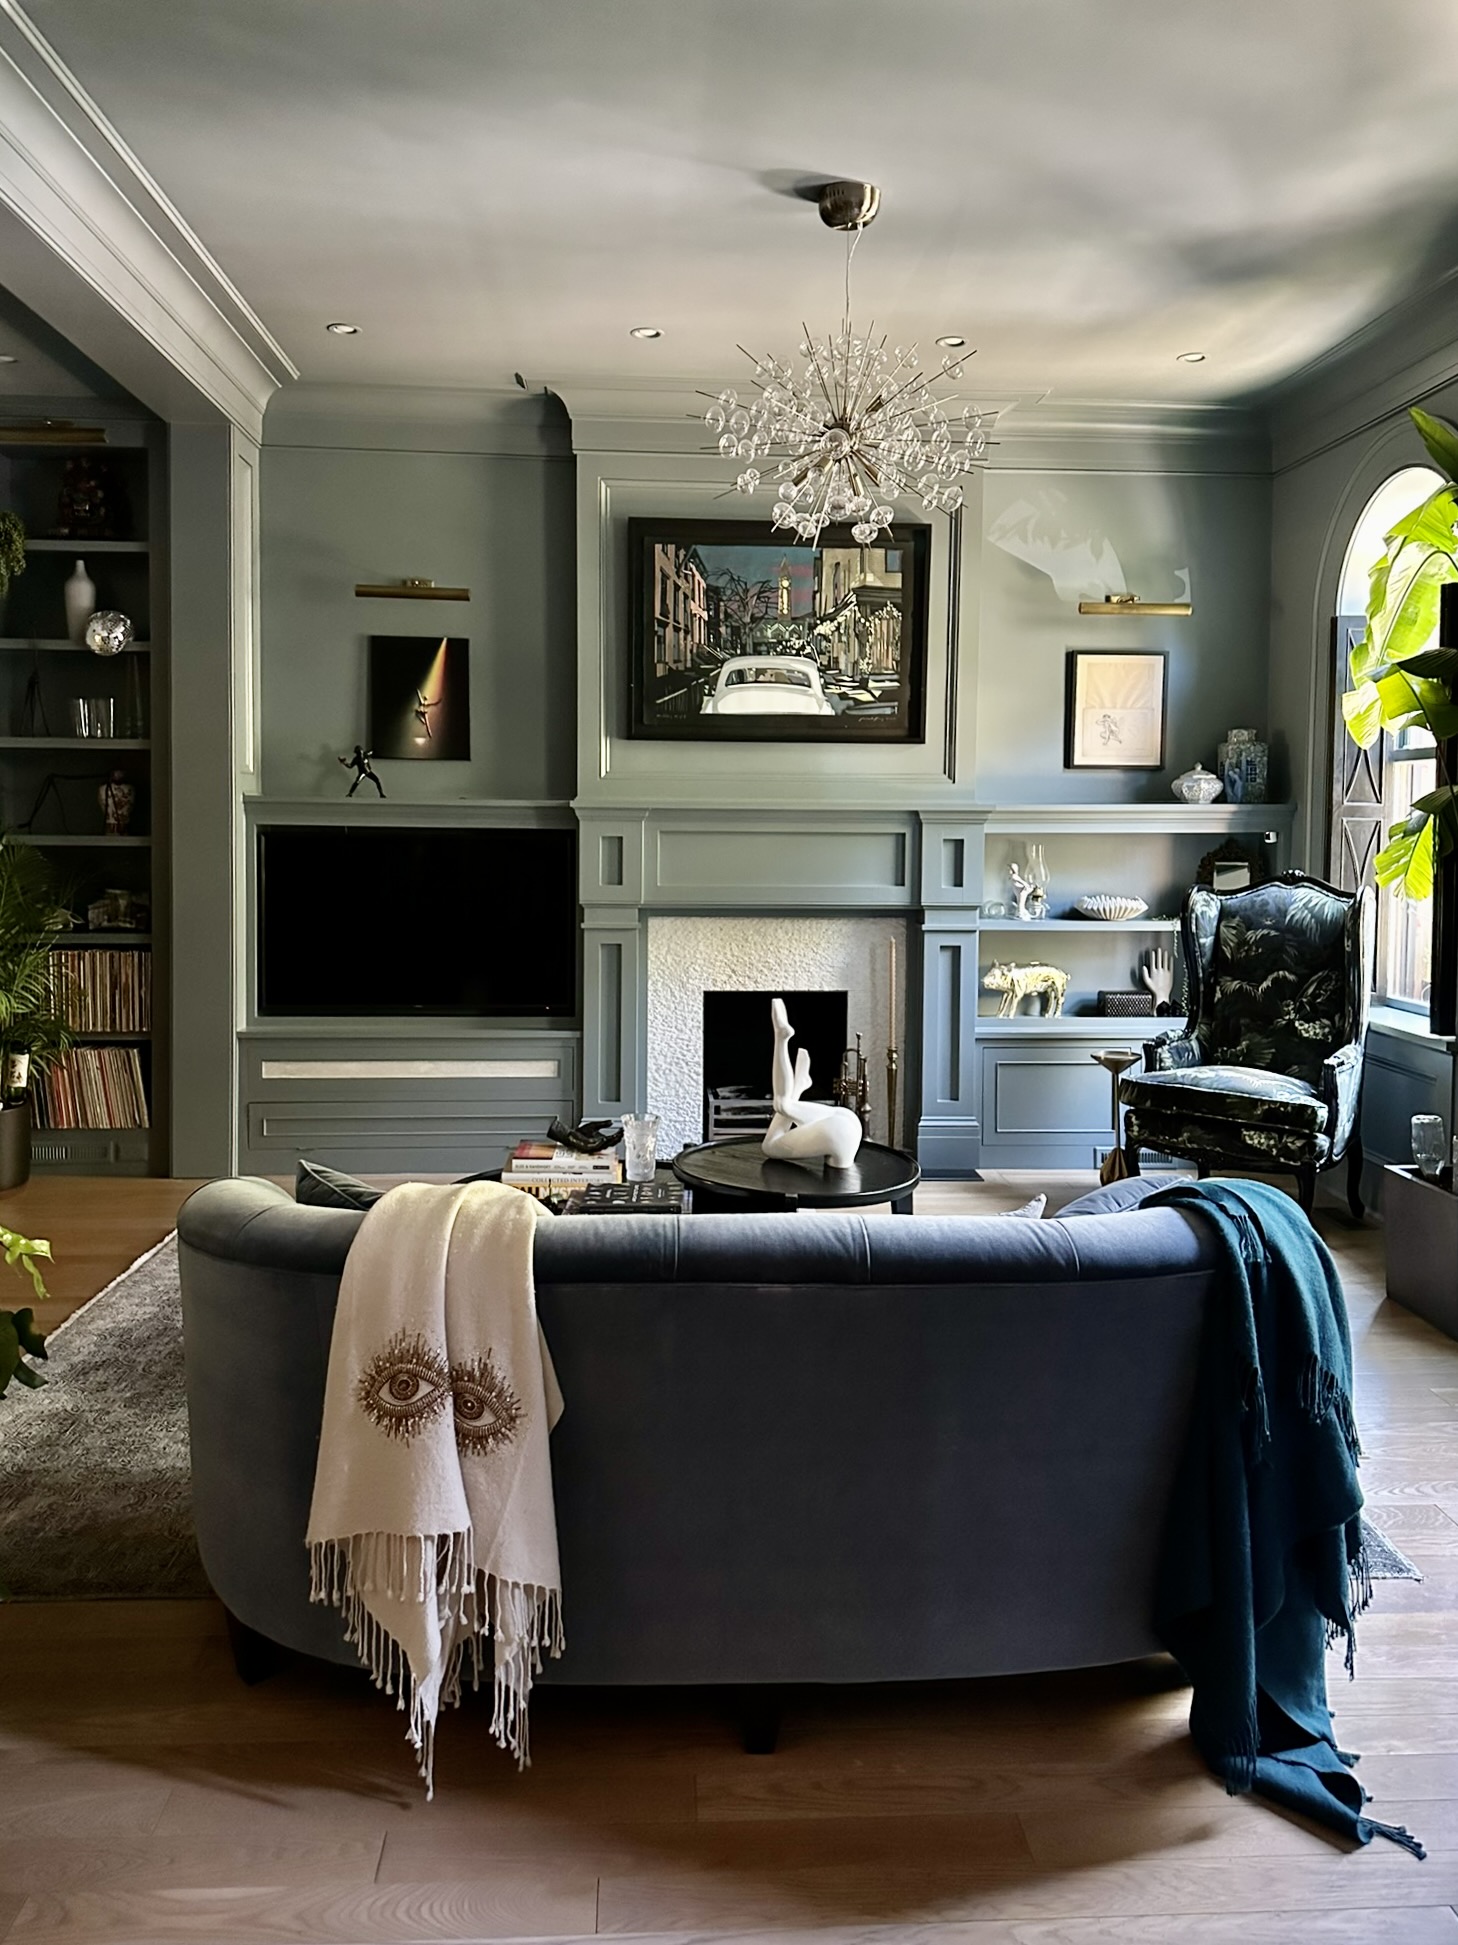 A living room features color drenching with Farrow & Ball de Nimes dark green paint.